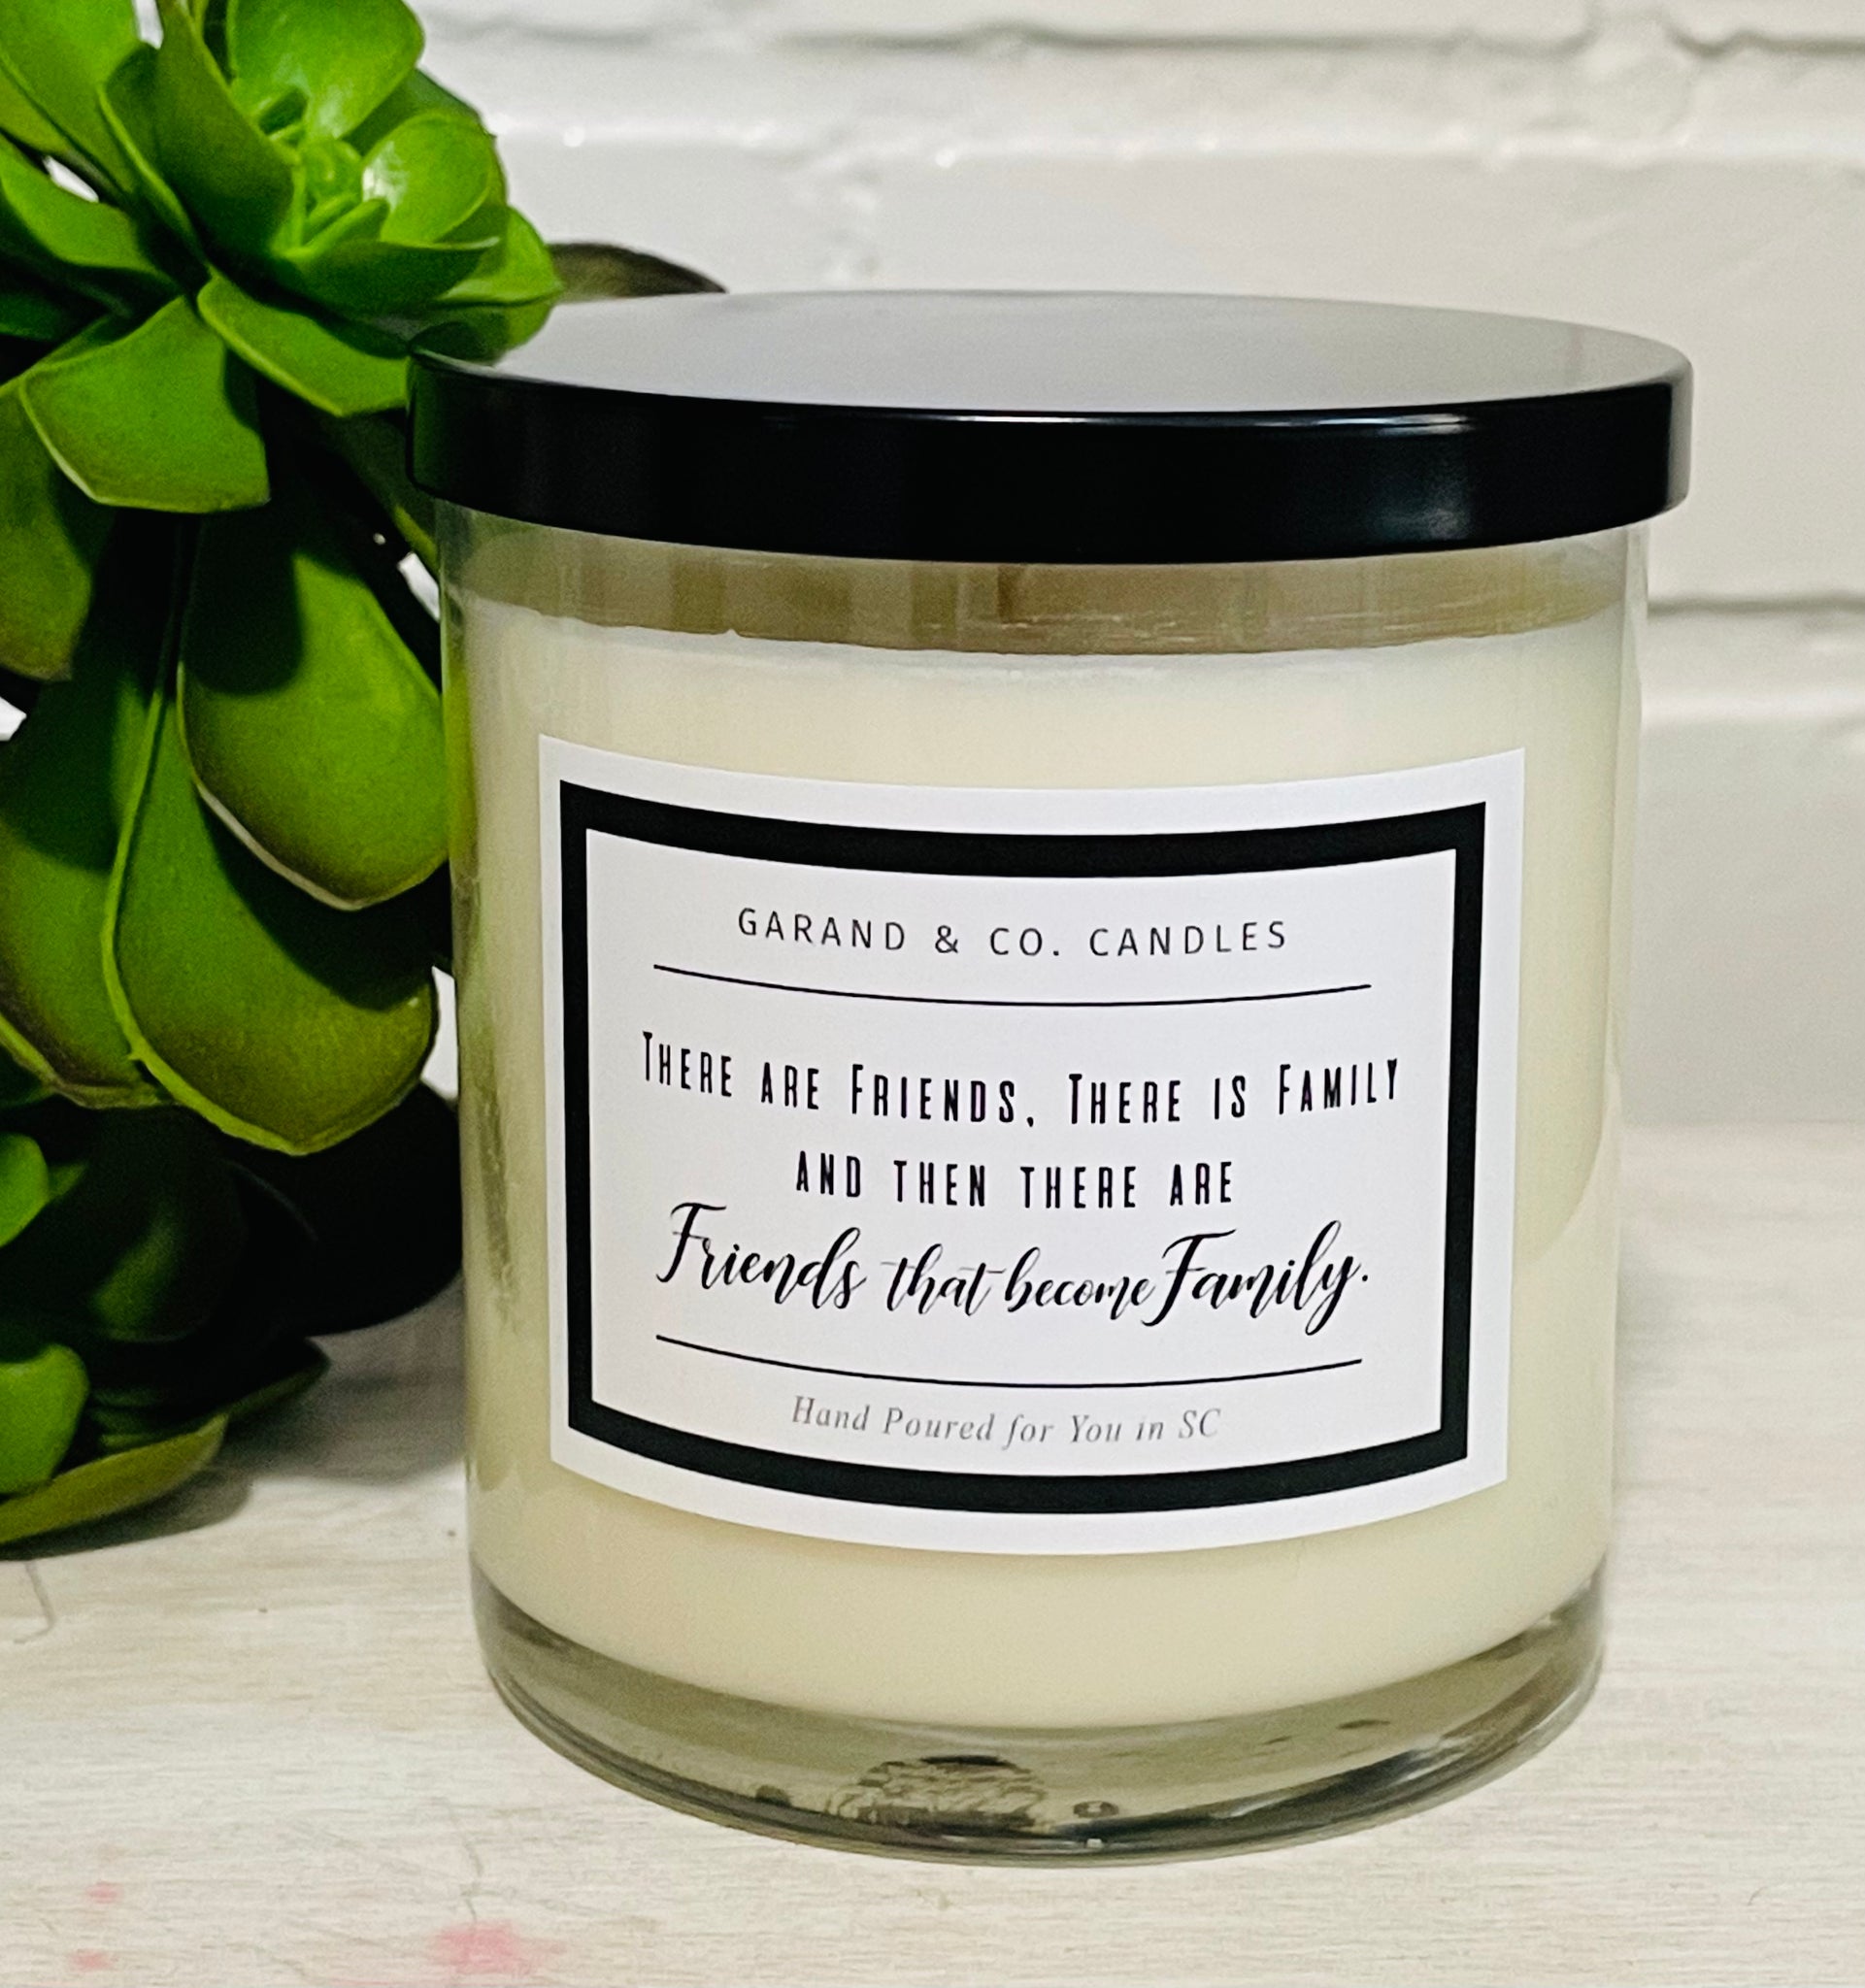 12 oz Clear Glass Jar Candle - Friends That Become Family Black and White